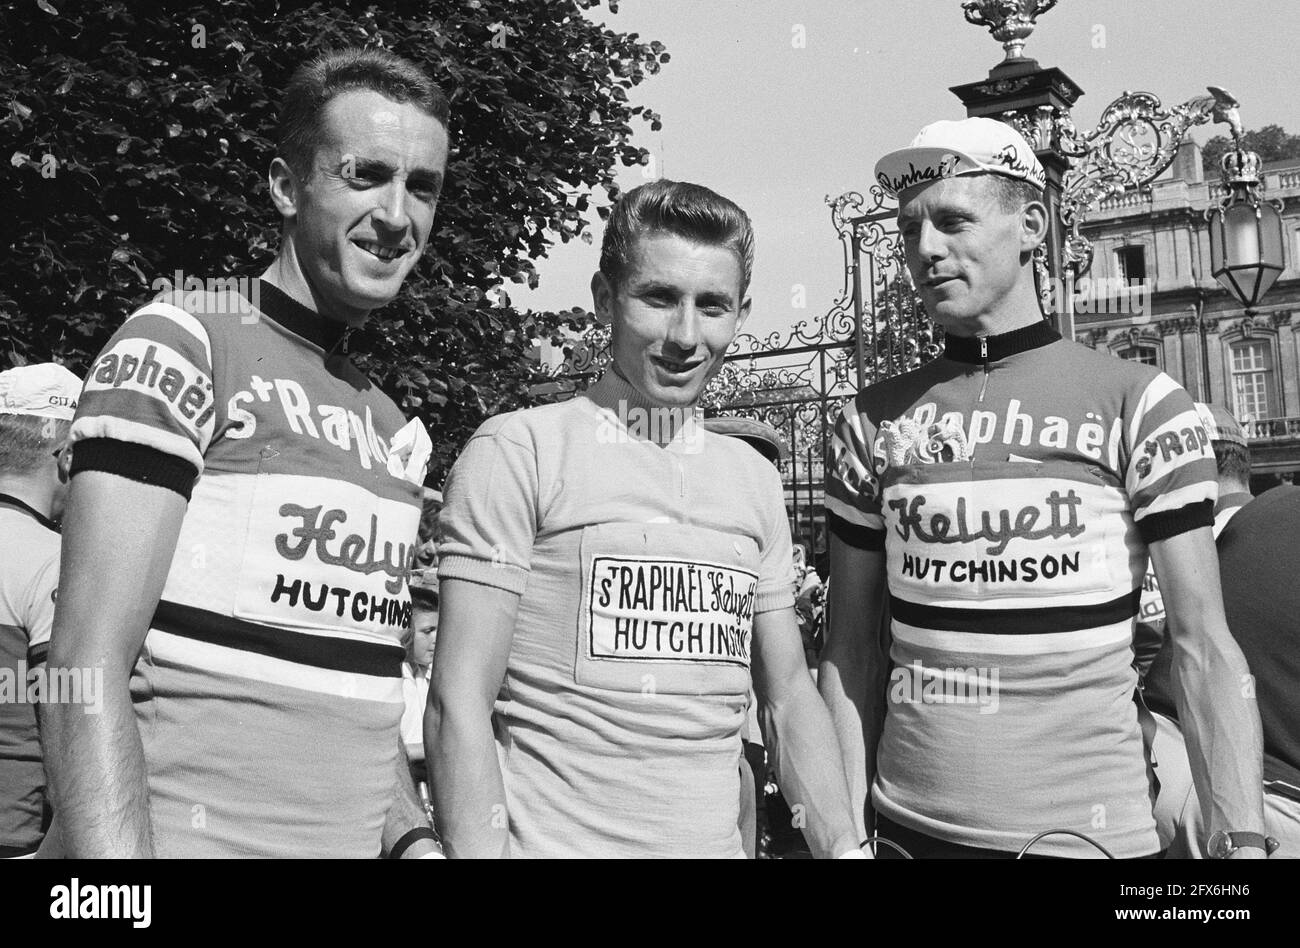 Ab Geldermans, Jacques Anquetil and Mies Stolker, Tour de France 1962 (1) (cropped), The Netherlands, 20th century press agency photo, news to remember, documentary, historic photography 1945-1990, visual stories, human history of the Twentieth Century, capturing moments in time Stock Photo